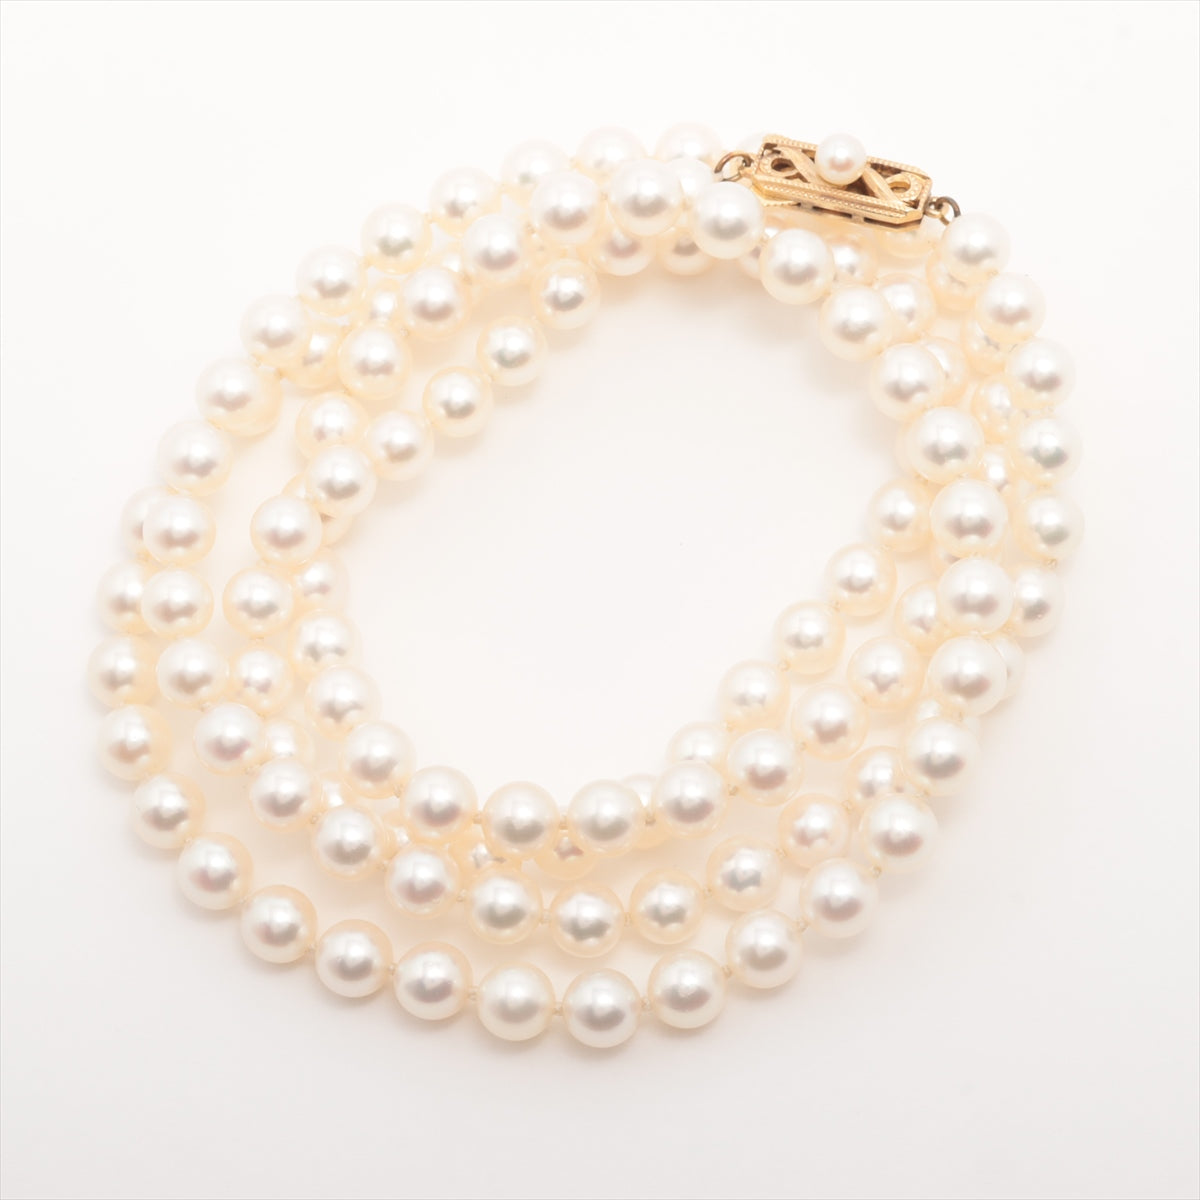 Micimoto Pearl Necklace K14 (YG) Total 42.8g About 6.0mm to 6.5mm